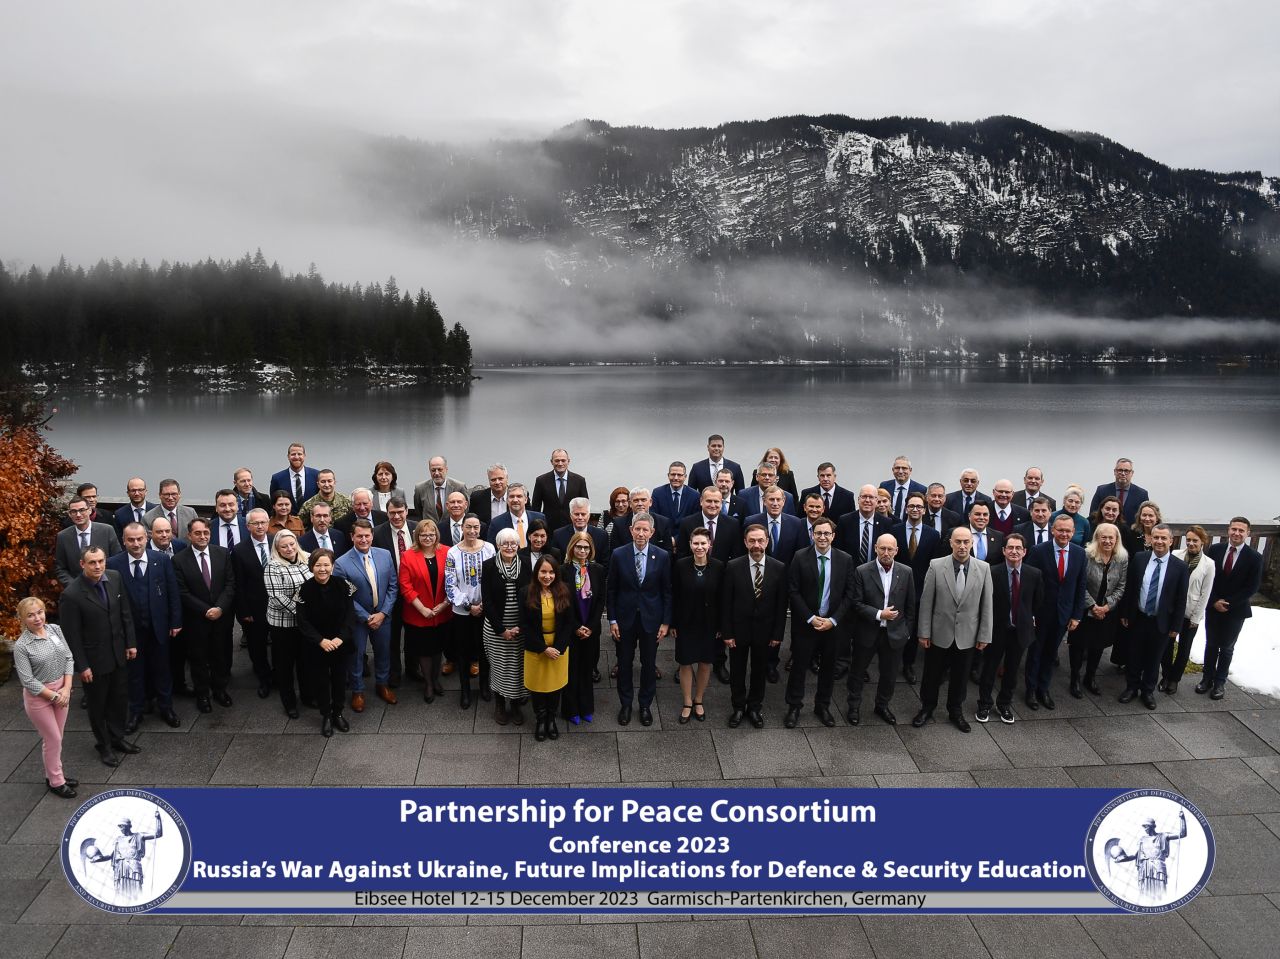 First day of the Partnership for Peace Consortium two-day conference at the Eibsee Hotel